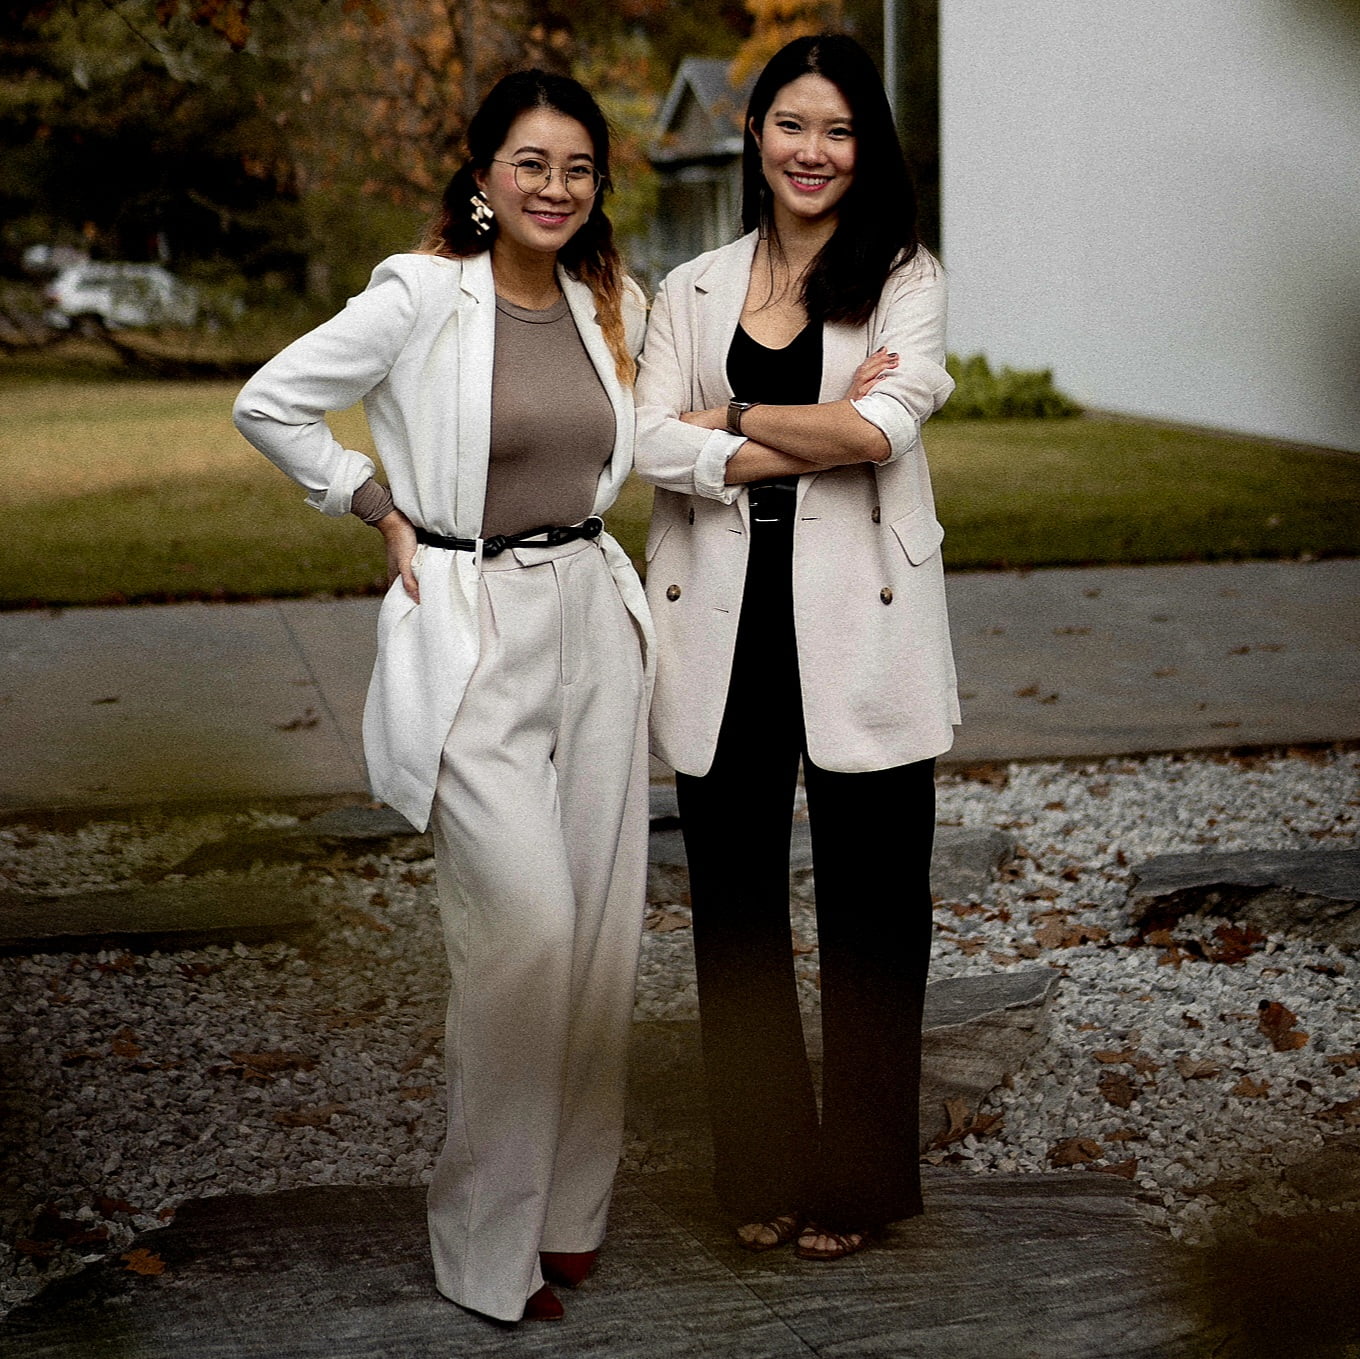 Vy Truong and Han Dang co-founders of Very Handsome Studio based in Houston inside 360 MAGAZINE